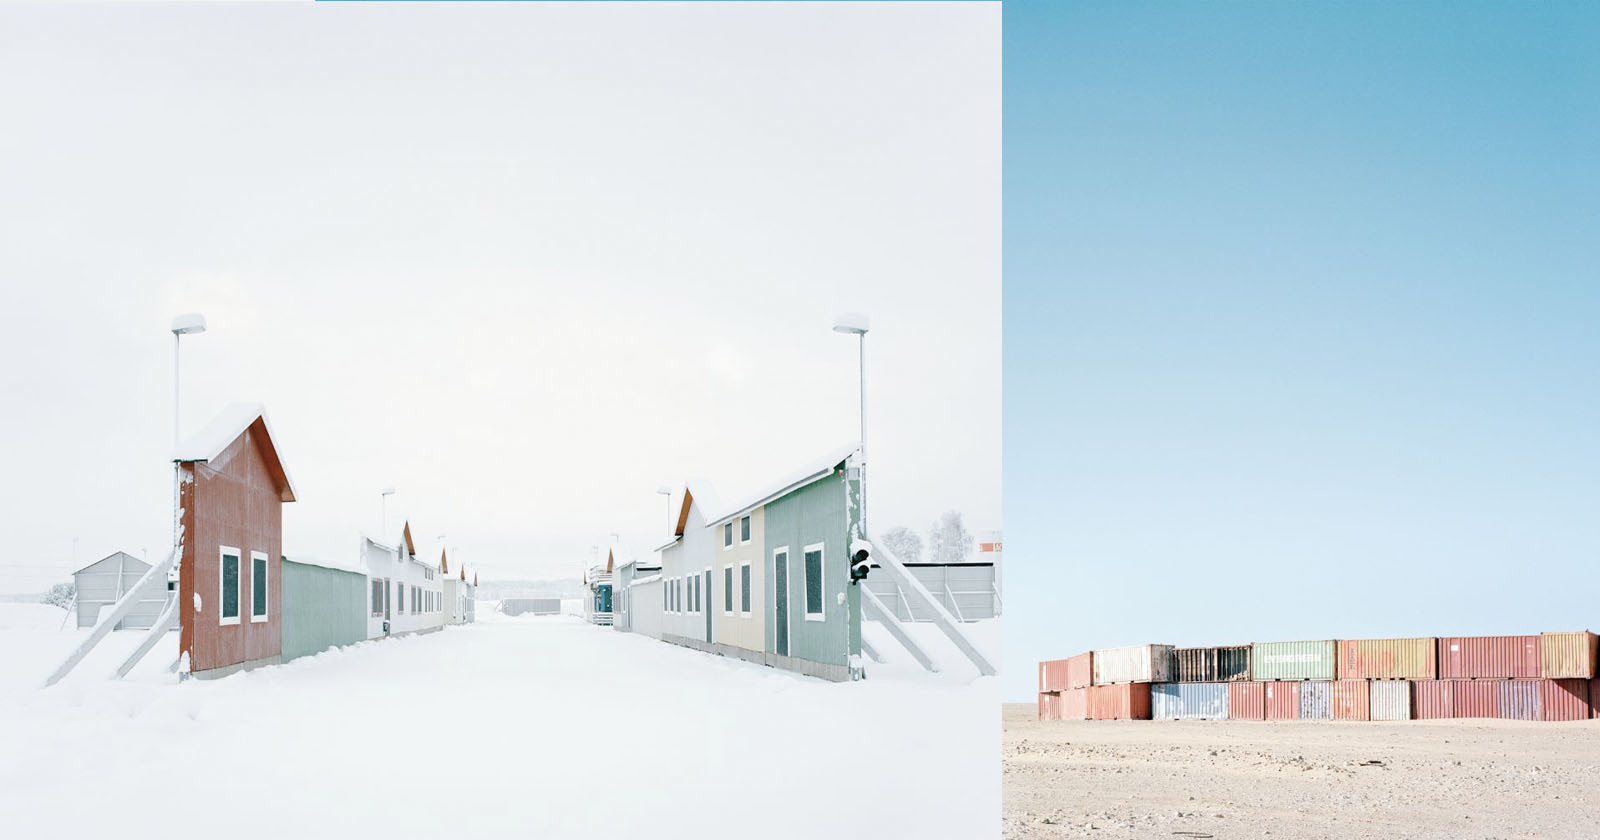  eerie photos remote restricted locations captured large format 